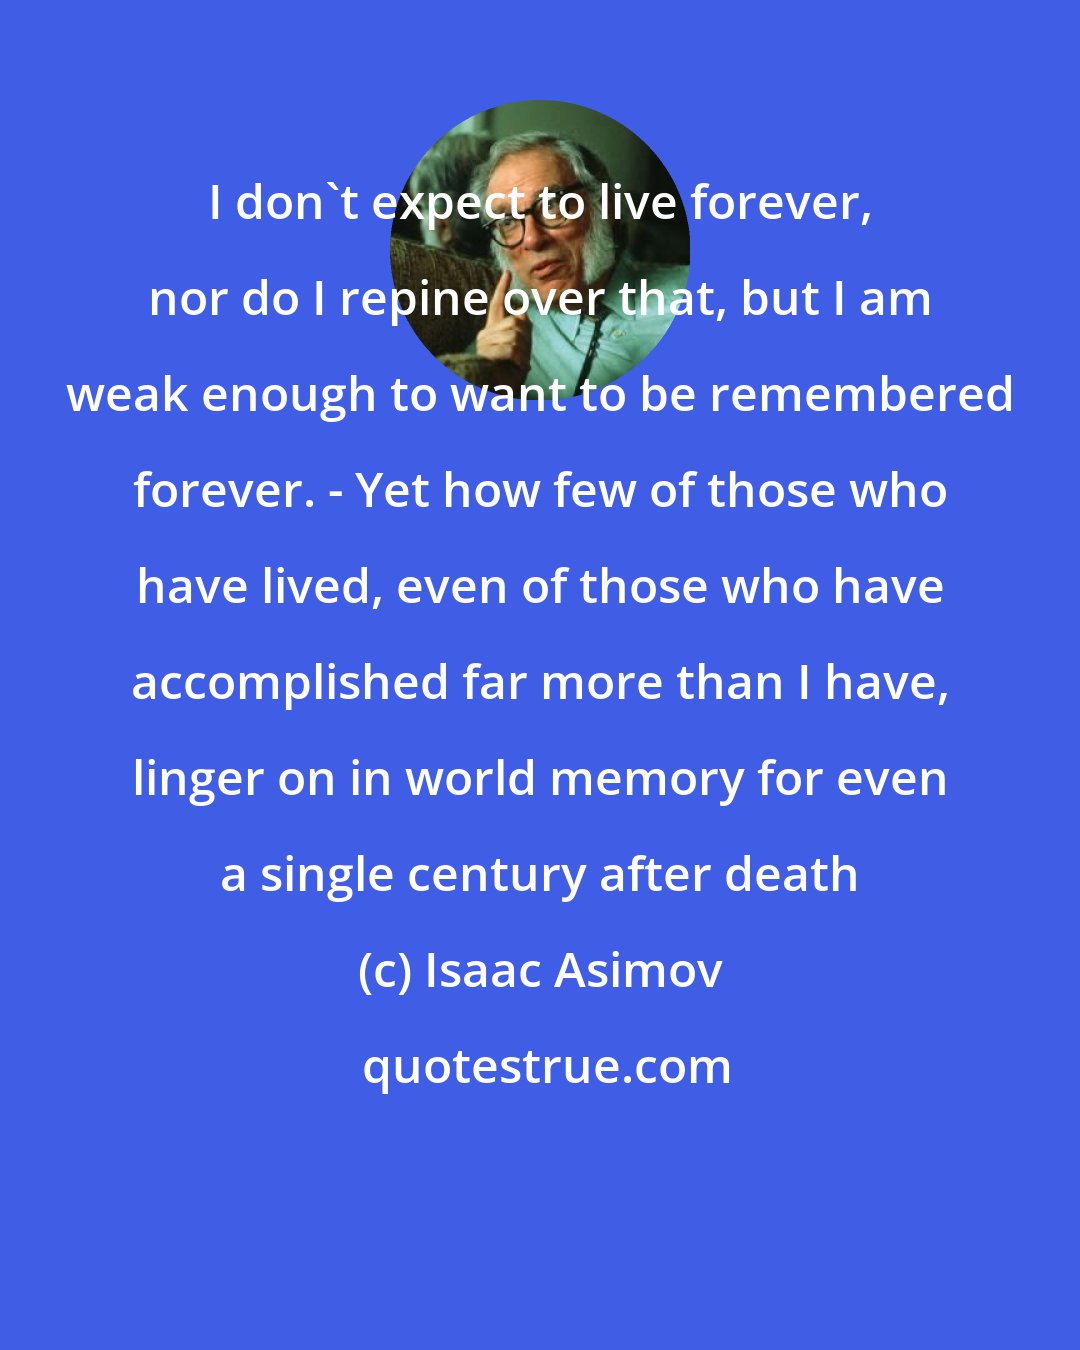 Isaac Asimov: I don't expect to live forever, nor do I repine over that, but I am weak enough to want to be remembered forever. - Yet how few of those who have lived, even of those who have accomplished far more than I have, linger on in world memory for even a single century after death